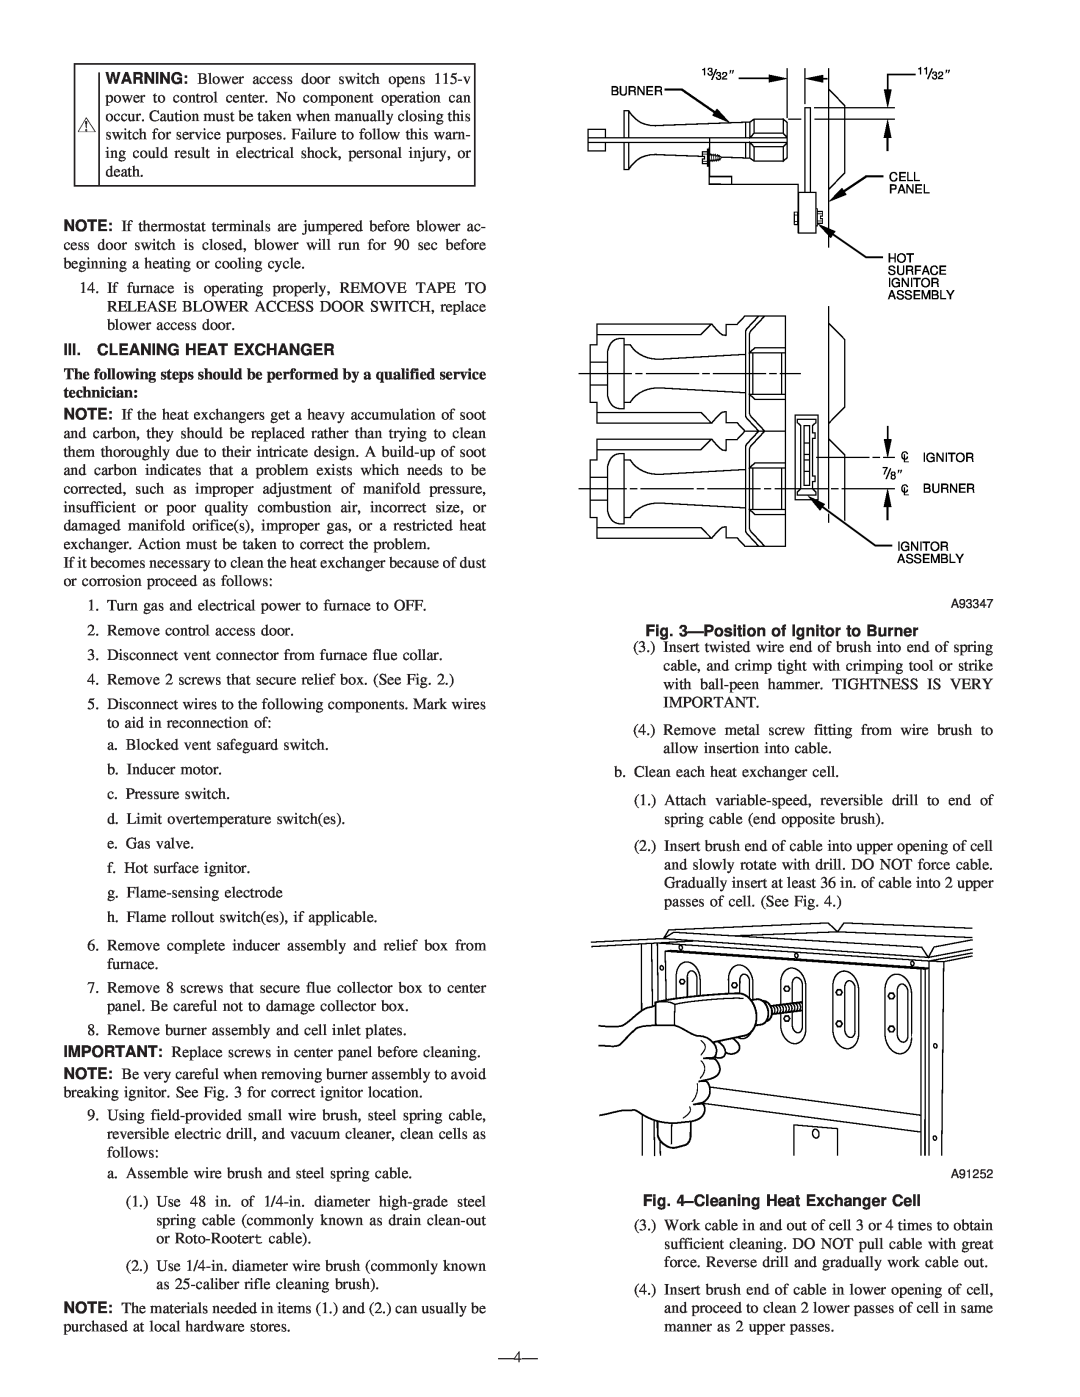 Bryant 393AAV instruction manual Iii.Cleaning Heat Exchanger, ÐPosition of Ignitor to Burner, ±Cleaning Heat Exchanger Cell 